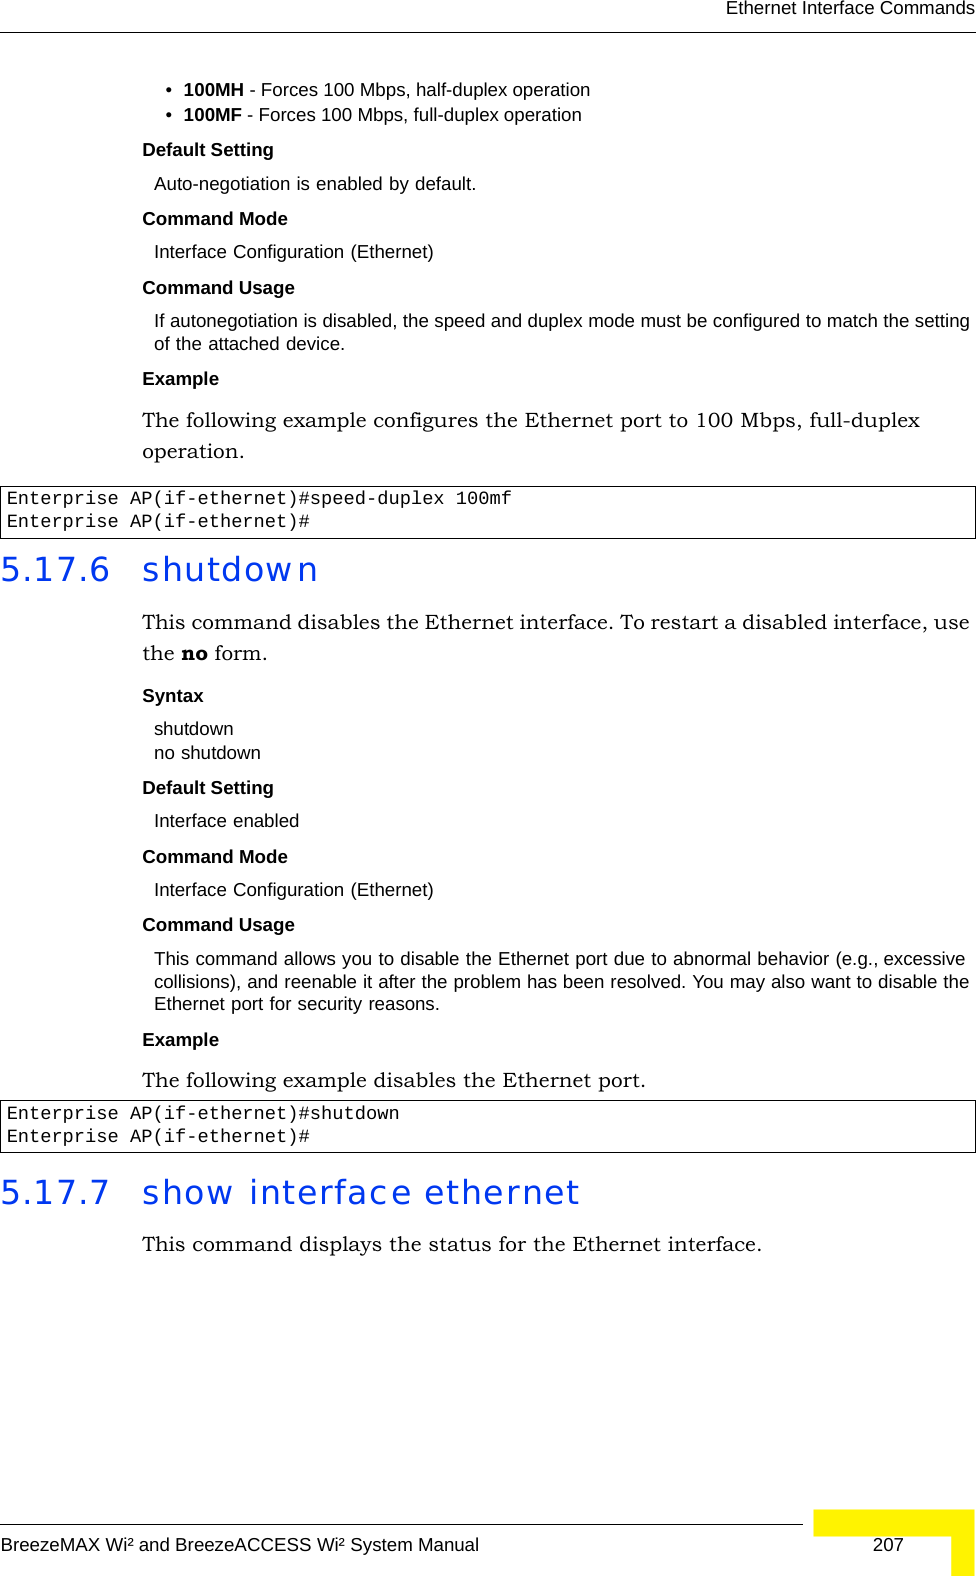 Ethernet Interface CommandsBreezeMAX Wi² and BreezeACCESS Wi² System Manual  207•100MH - Forces 100 Mbps, half-duplex operation •100MF - Forces 100 Mbps, full-duplex operation Default Setting Auto-negotiation is enabled by default. Command Mode Interface Configuration (Ethernet)Command UsageIf autonegotiation is disabled, the speed and duplex mode must be configured to match the setting of the attached device.Example The following example configures the Ethernet port to 100 Mbps, full-duplex operation.5.17.6 shutdown This command disables the Ethernet interface. To restart a disabled interface, use the no form.Syntax shutdownno shutdownDefault Setting Interface enabledCommand Mode Interface Configuration (Ethernet)Command Usage This command allows you to disable the Ethernet port due to abnormal behavior (e.g., excessive collisions), and reenable it after the problem has been resolved. You may also want to disable the Ethernet port for security reasons. Example The following example disables the Ethernet port.5.17.7 show interface ethernetThis command displays the status for the Ethernet interface.Enterprise AP(if-ethernet)#speed-duplex 100mfEnterprise AP(if-ethernet)#Enterprise AP(if-ethernet)#shutdownEnterprise AP(if-ethernet)#